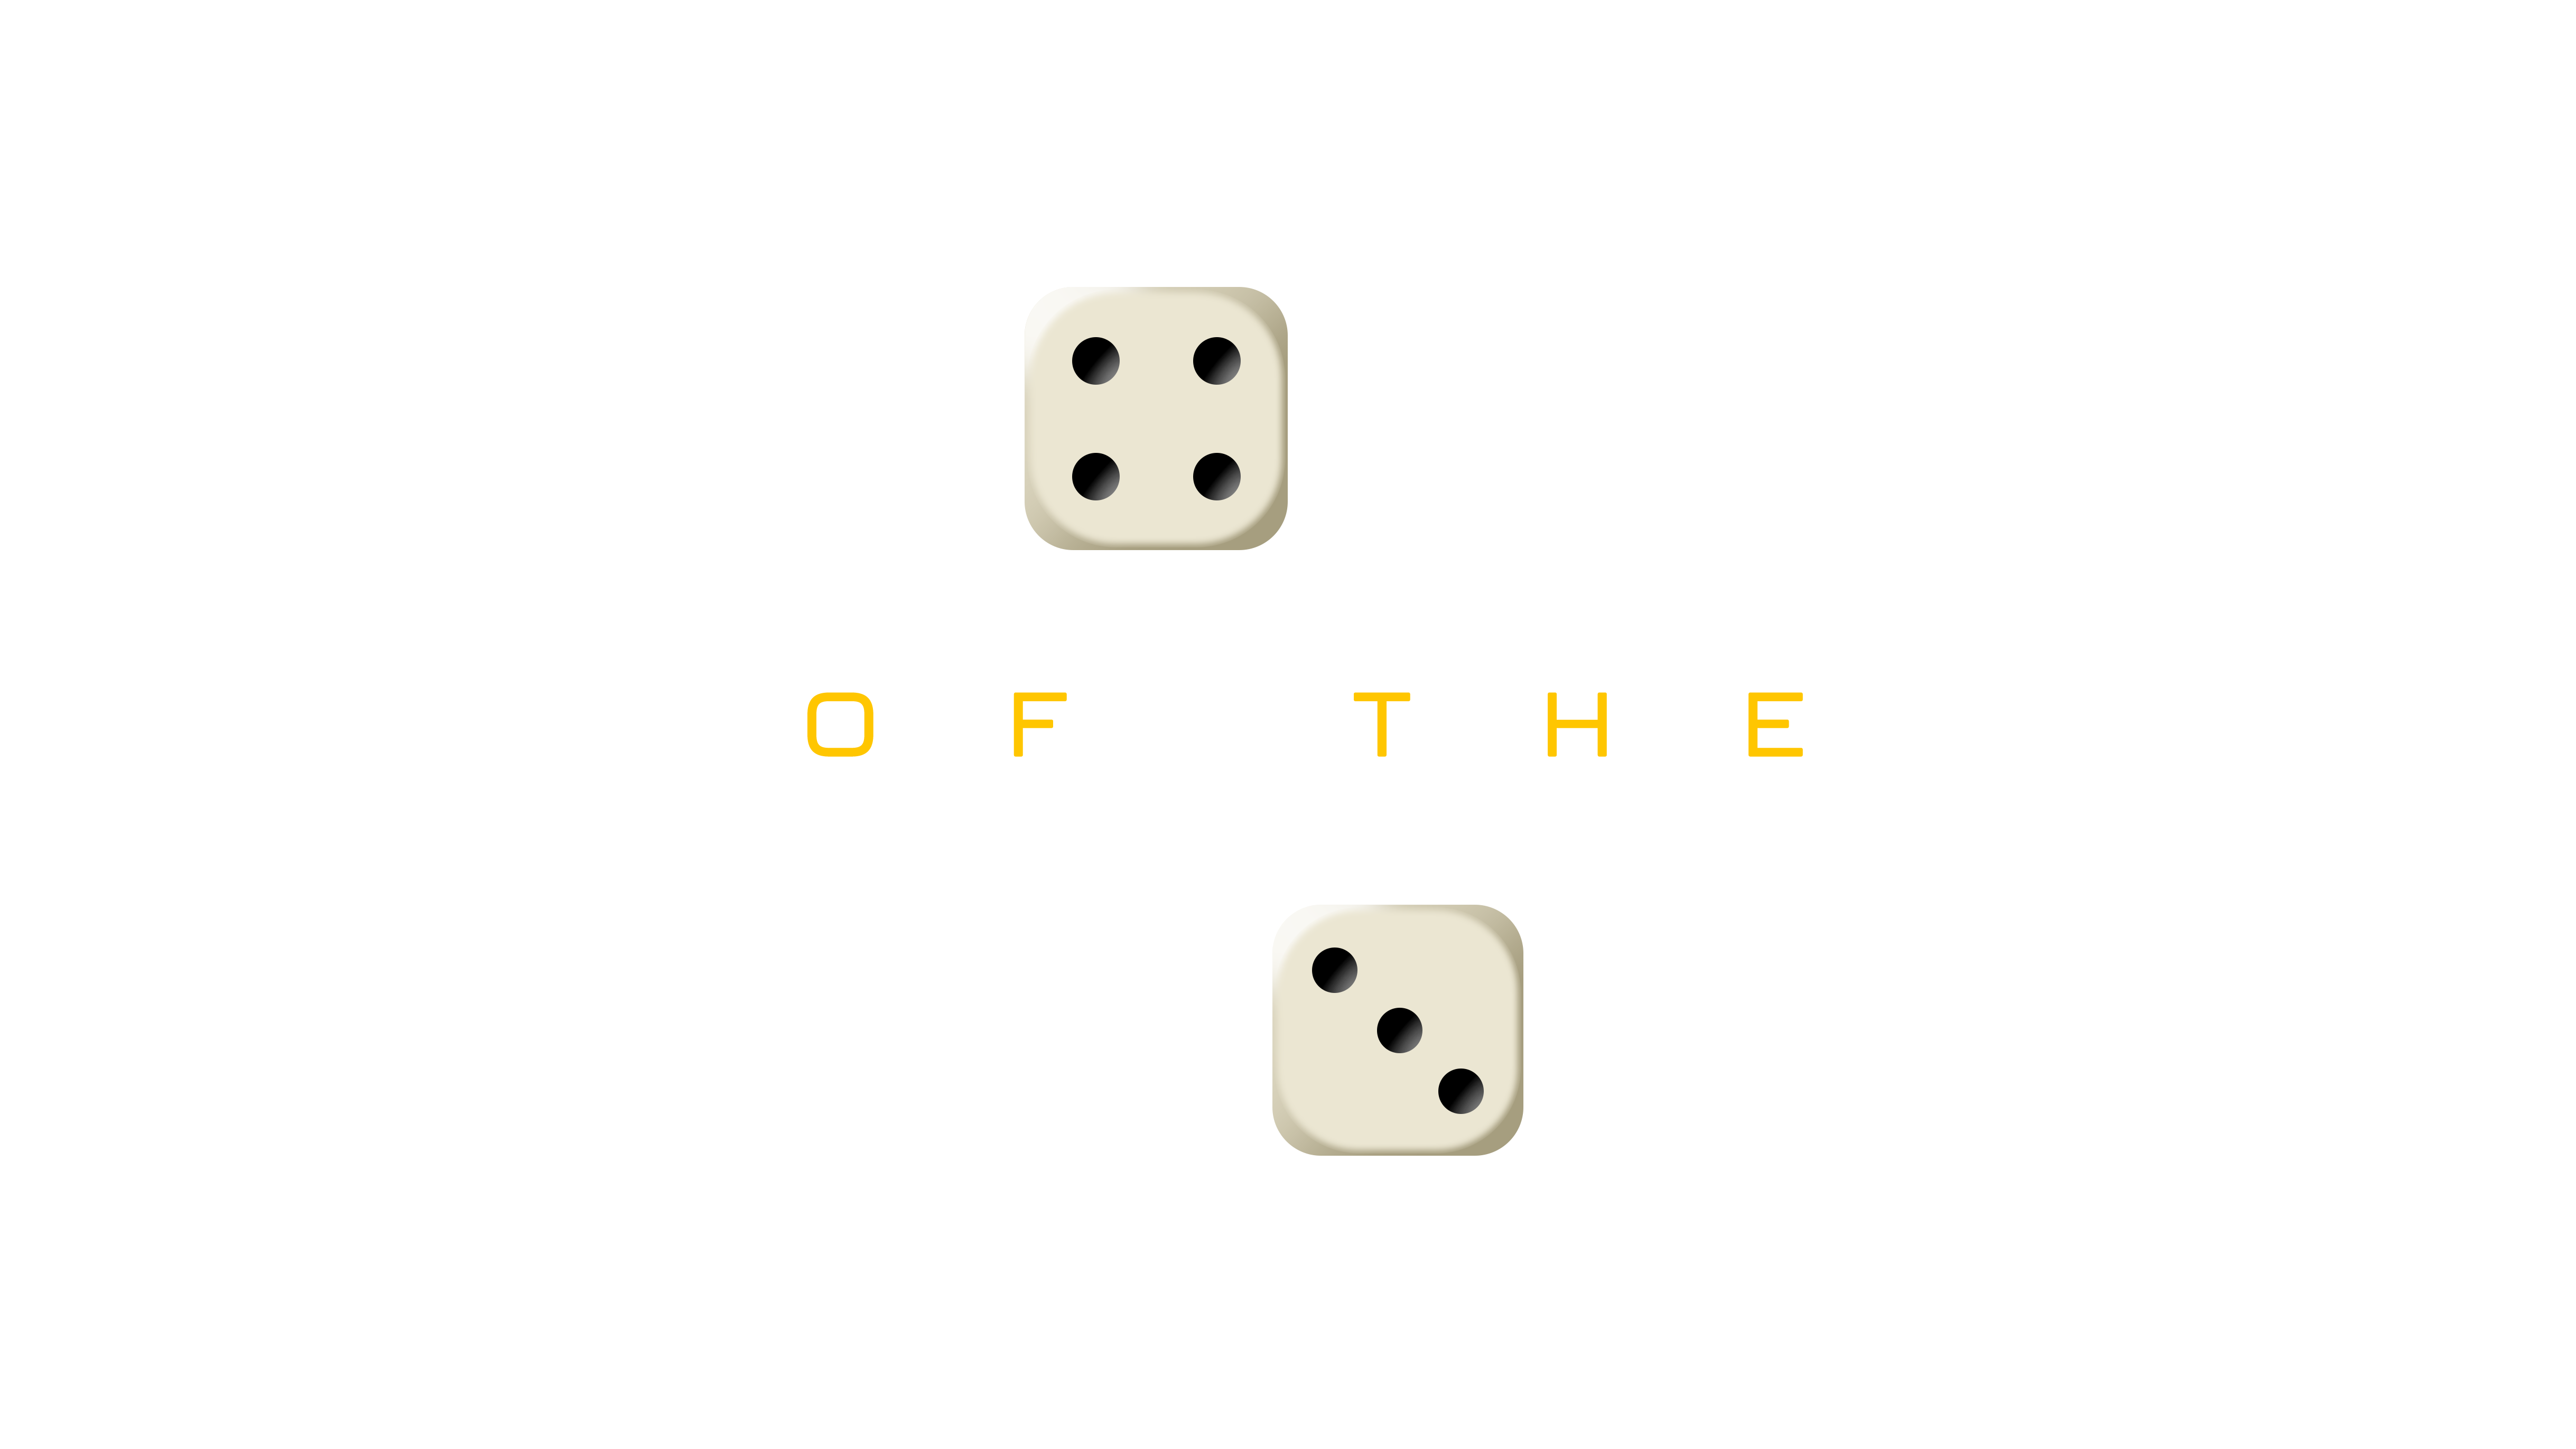 Theme: Roll of the Dice